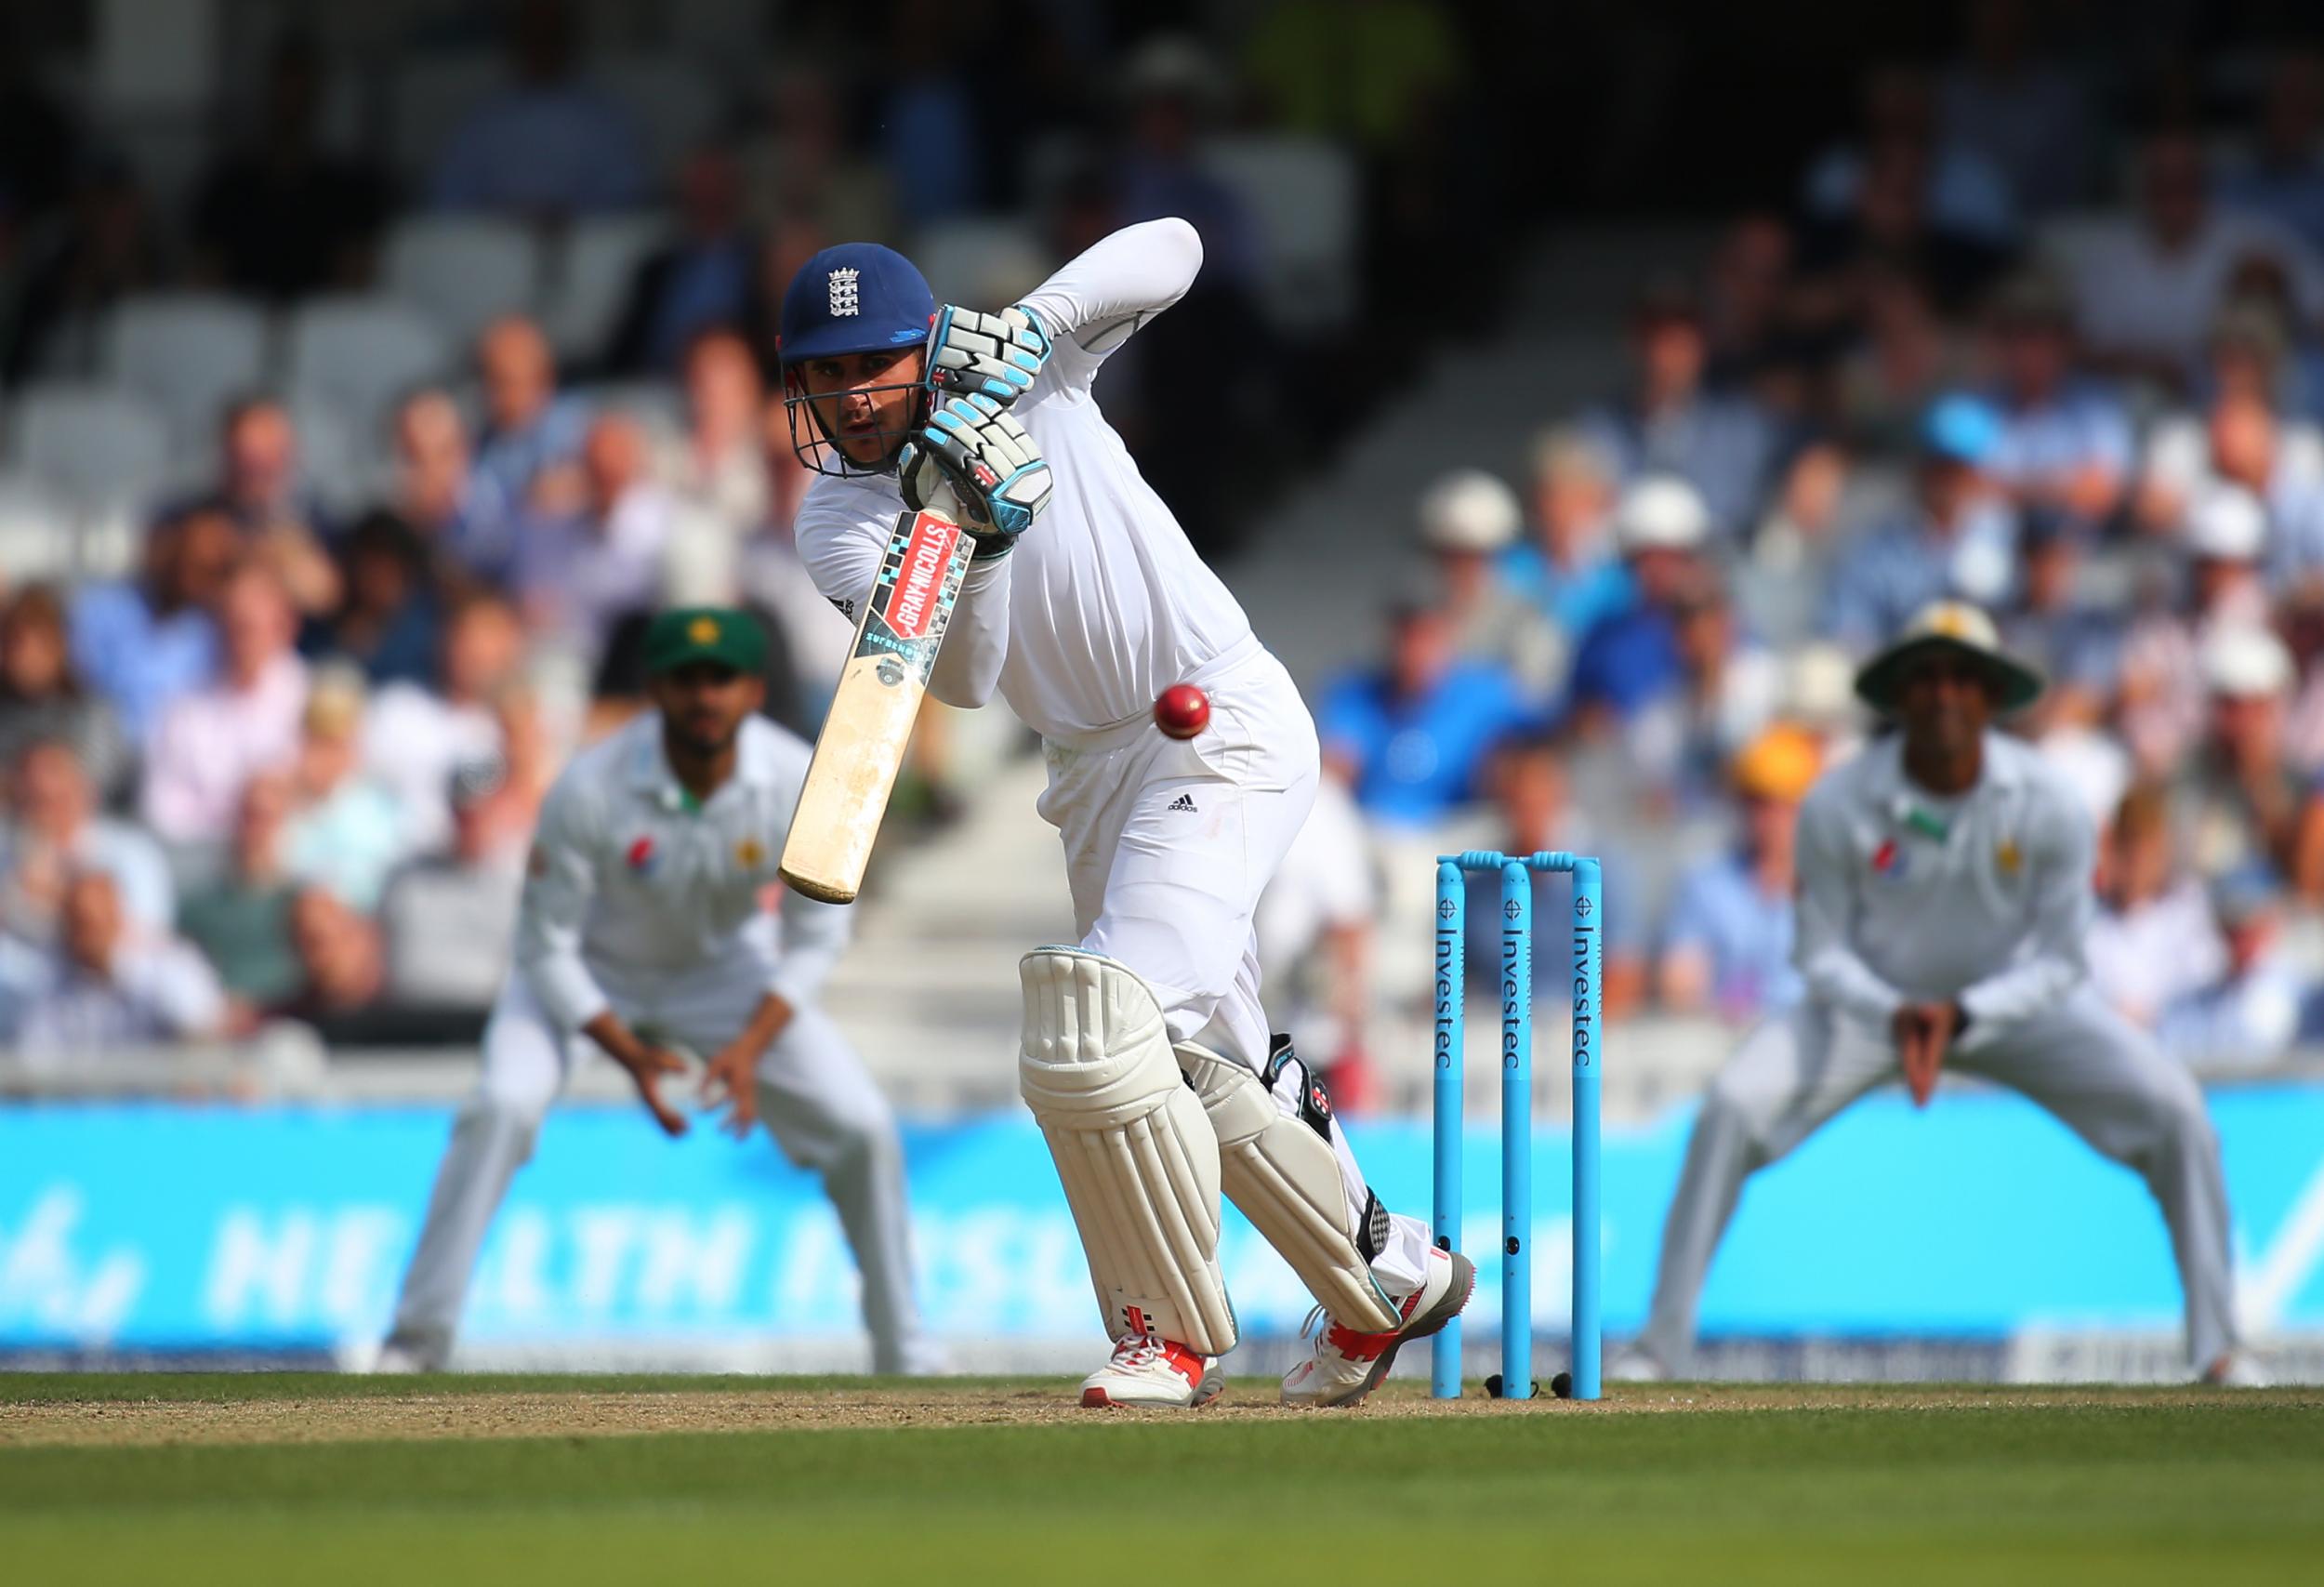 Alex Hales of England bats during day three of the 4th Investec Test